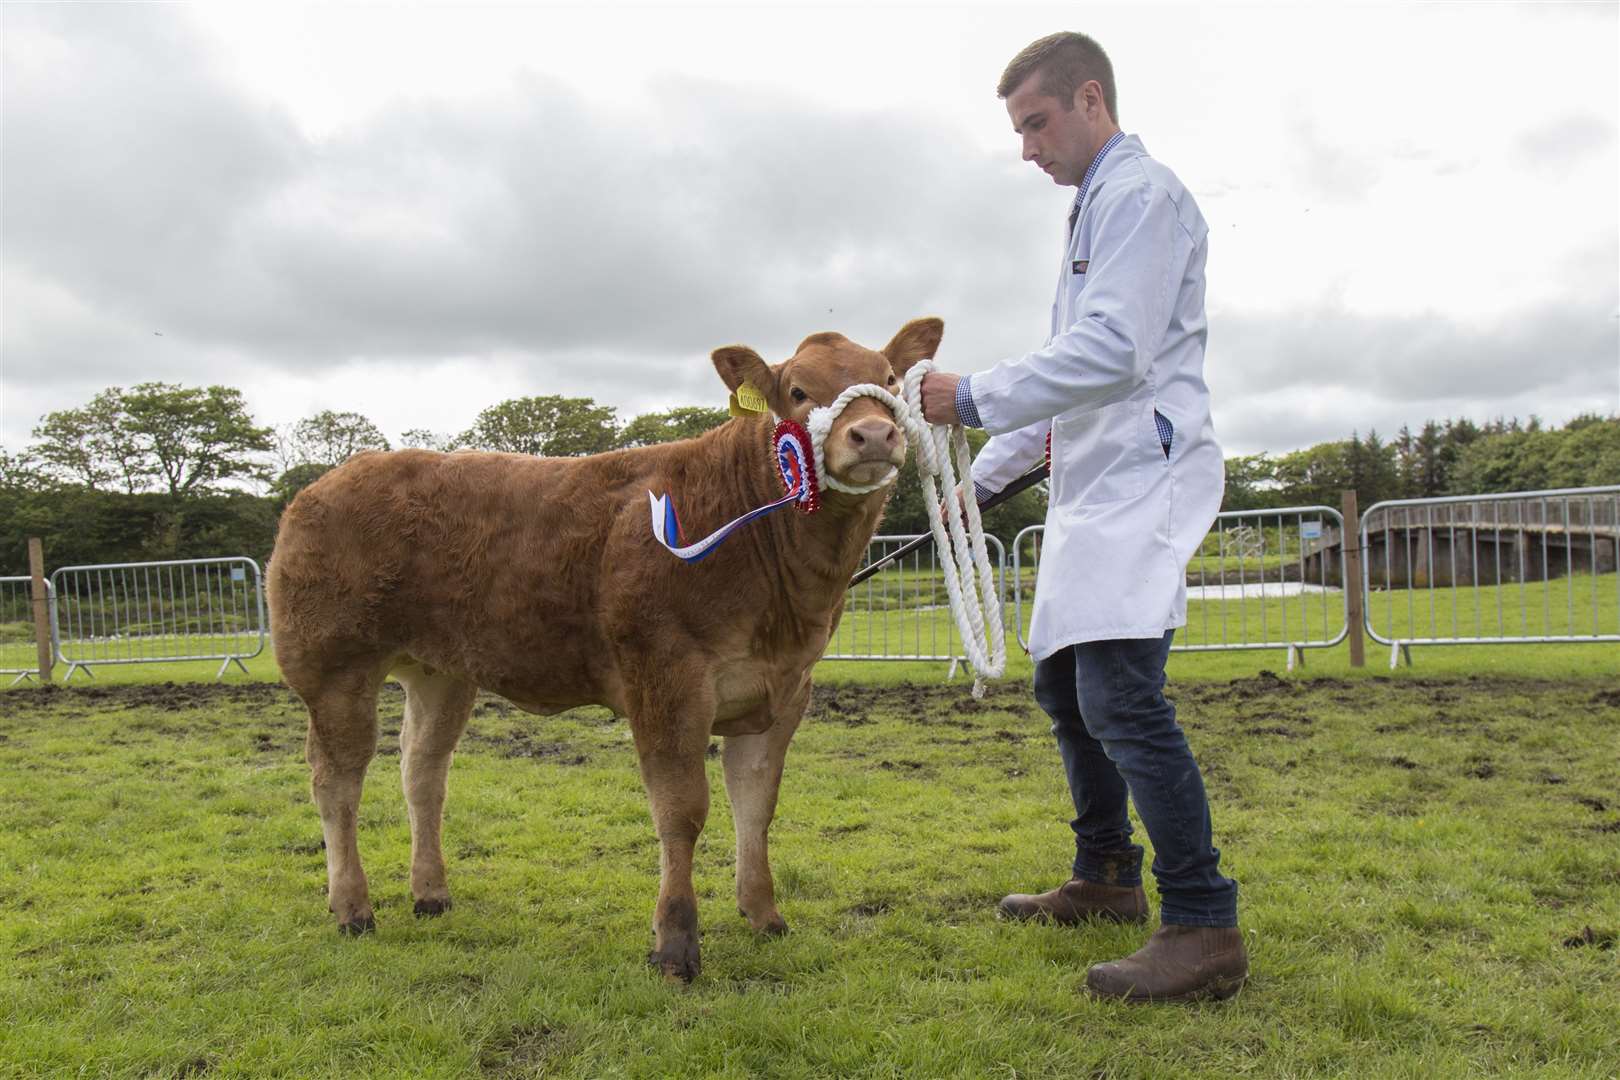 Kris Sutherland, Dunbeath Farm, took the supreme cattle championship and the champion of champions title with his commercial champion, Sassy Lady, a March-born Limousin cross heifer after the AI bull Lodge Hamlet. Picture: Ann-Marie Jones / Northern Studios